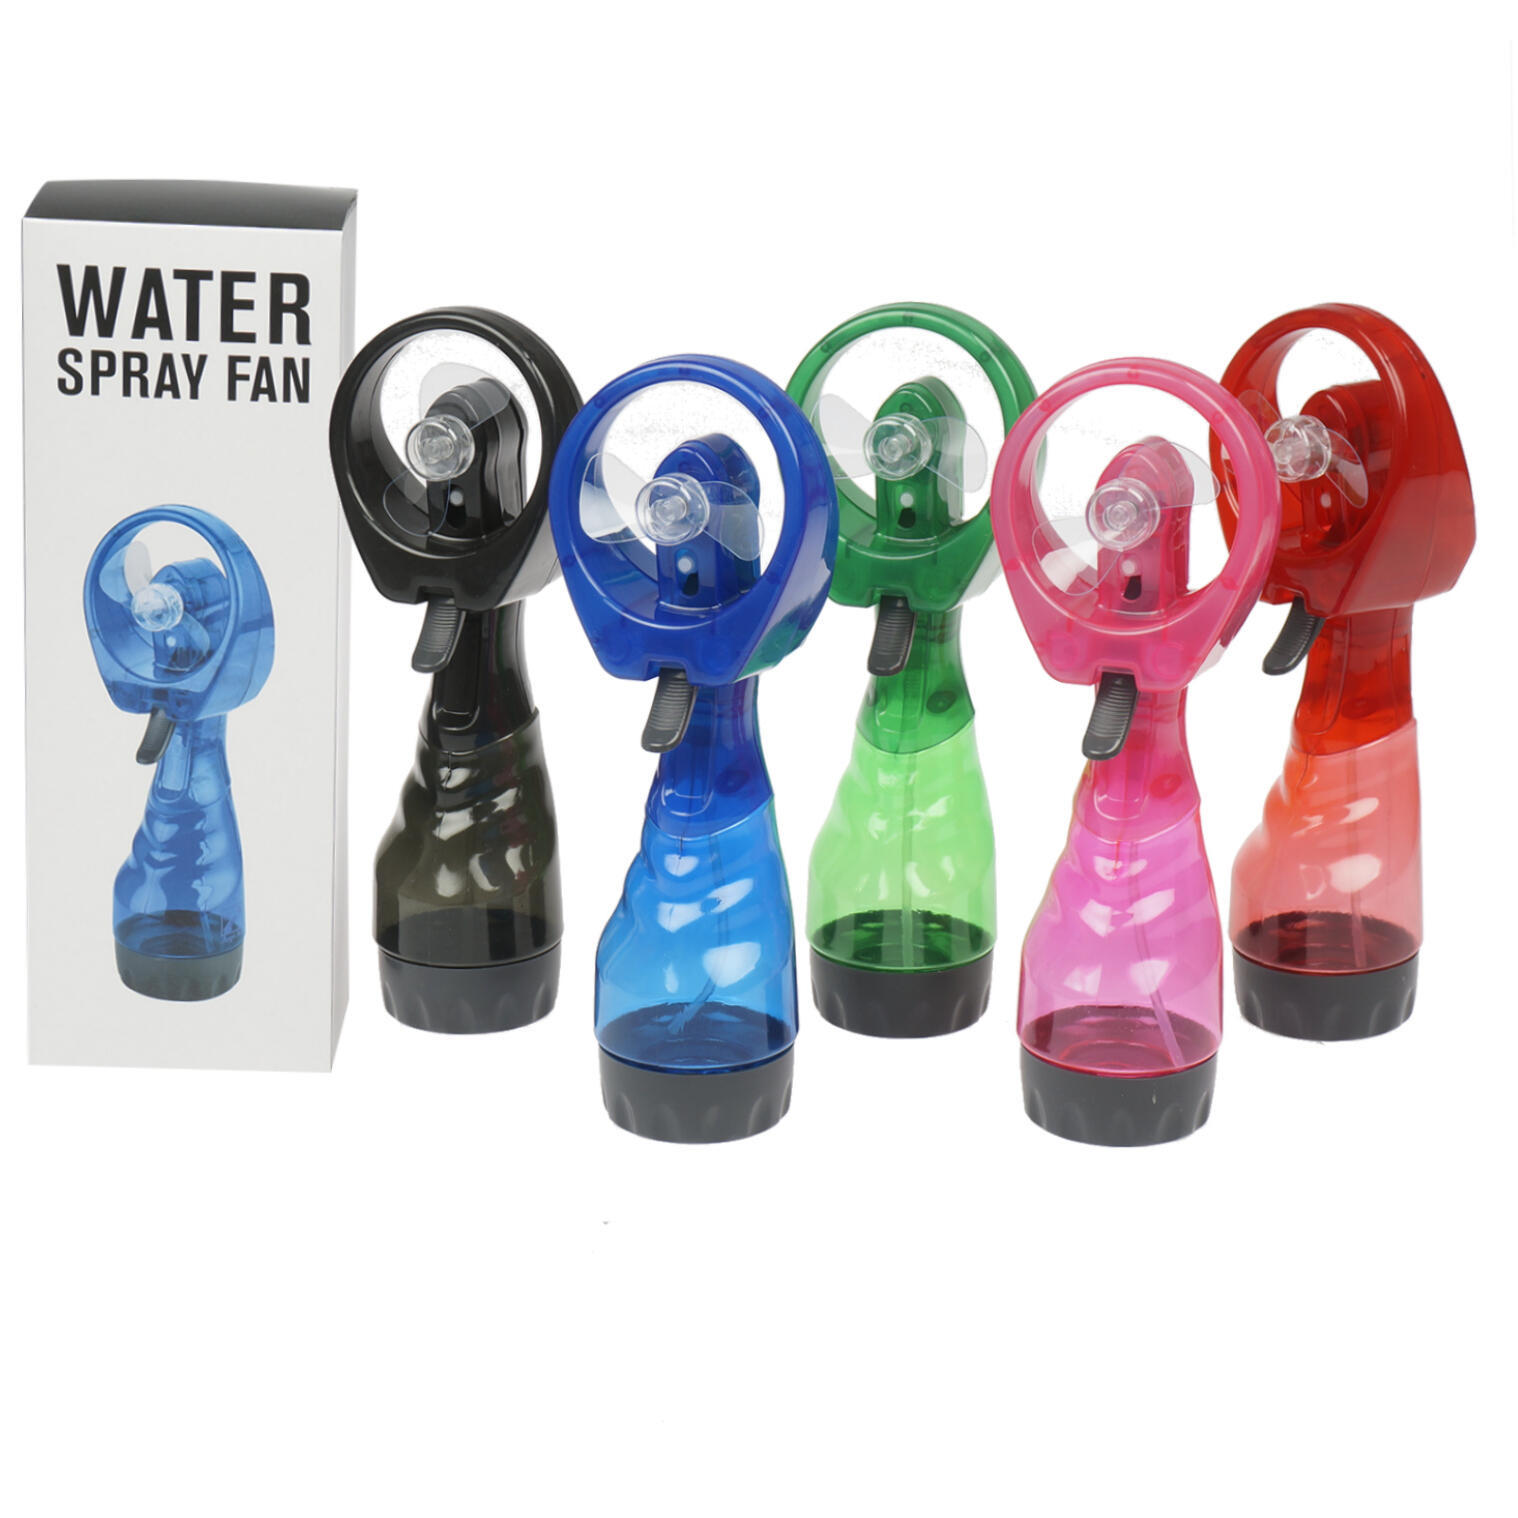 Spray Fan with Water Assorted